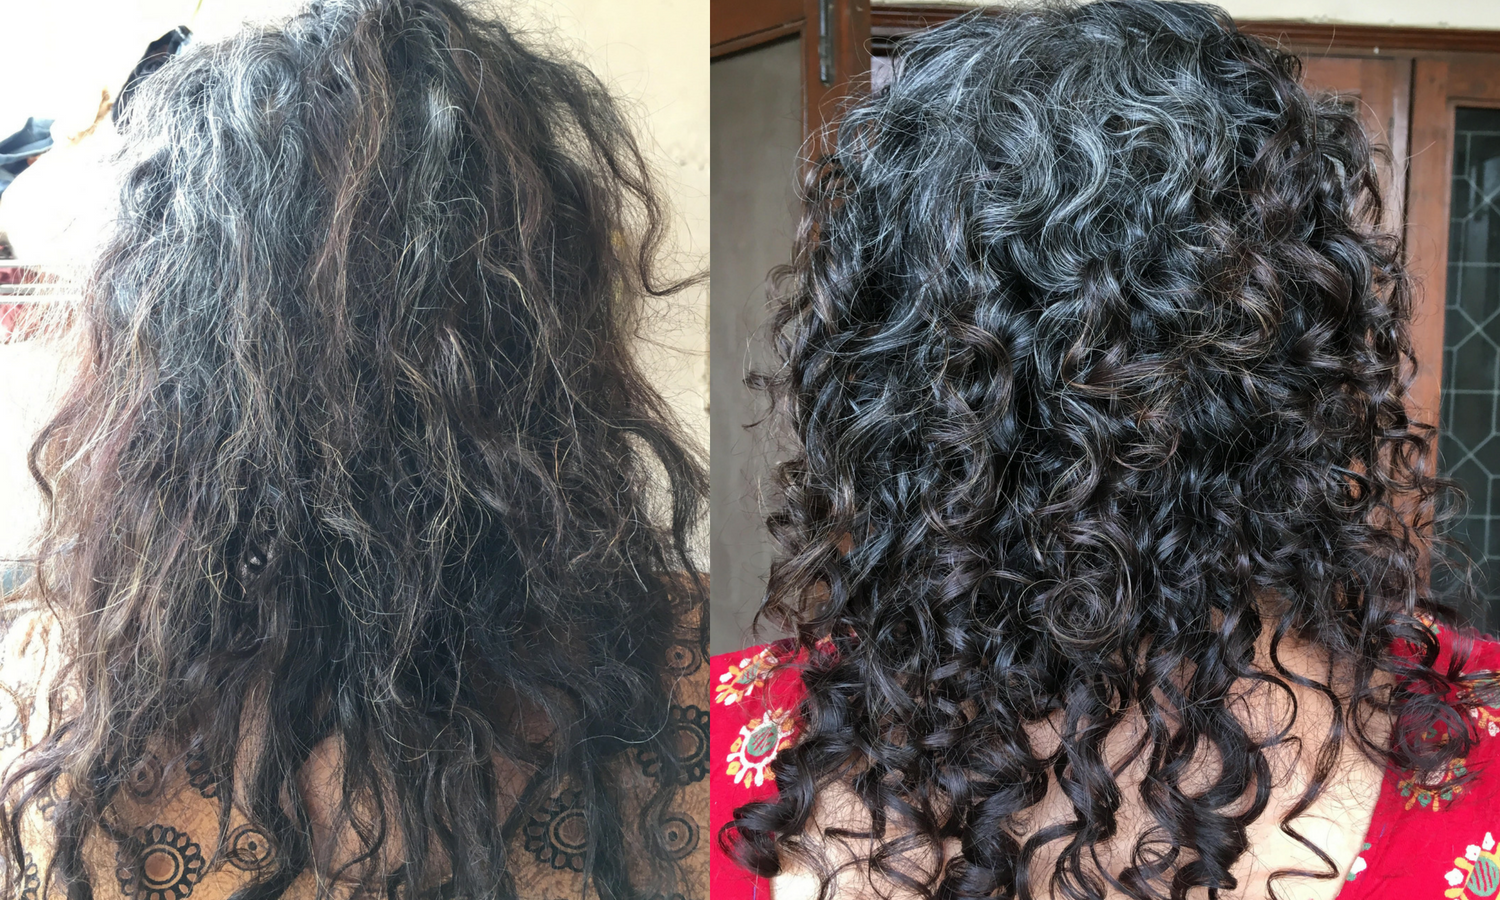 9 Amazing Curly Hair Hacks That Actually Work.